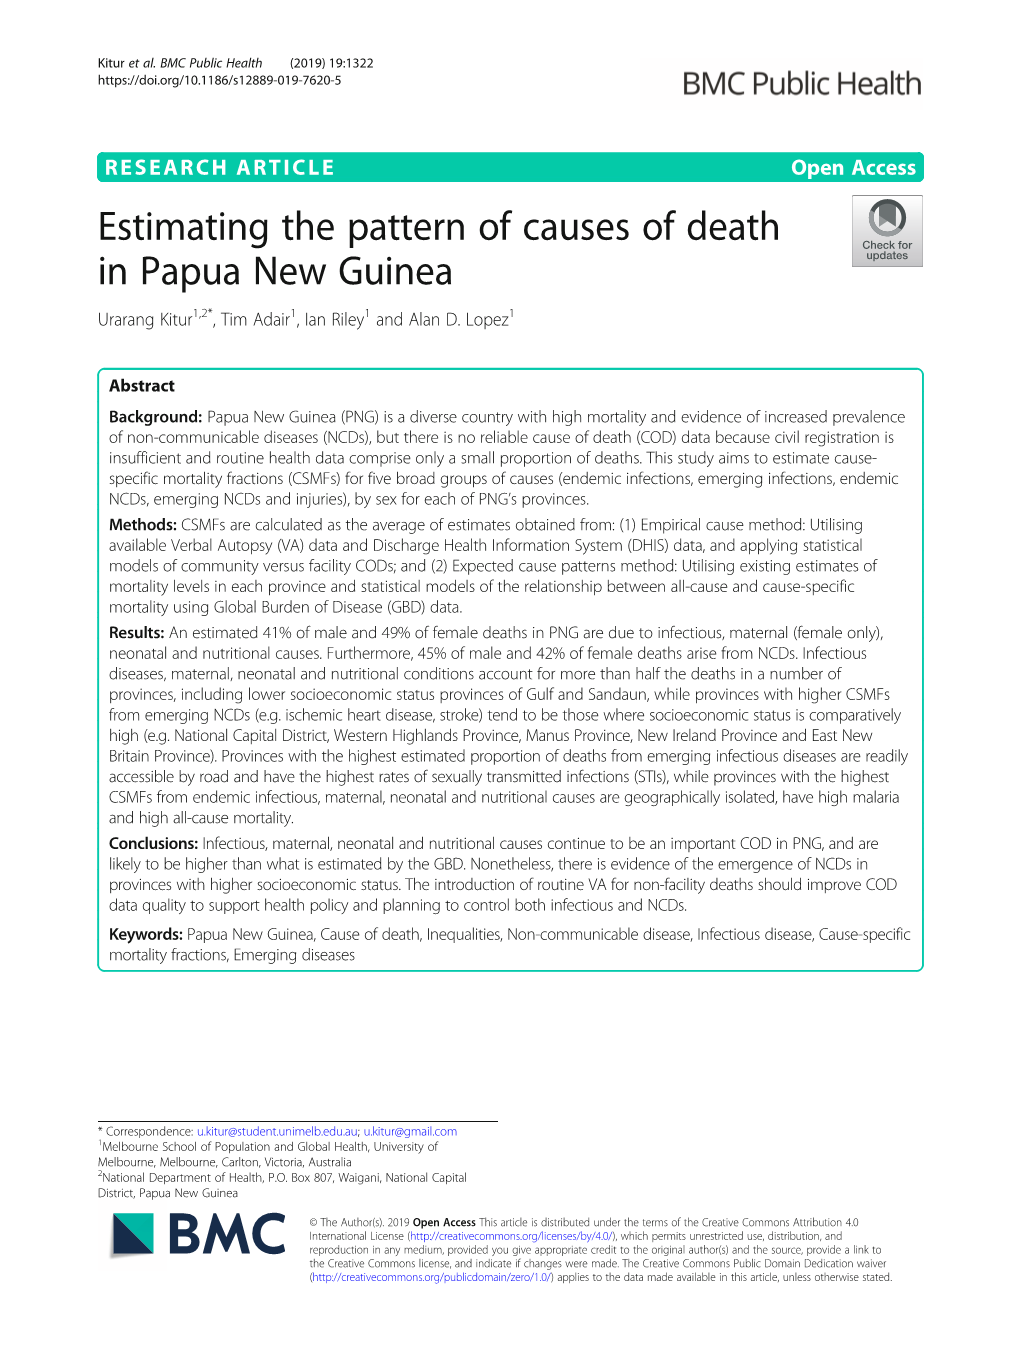 Estimating the Pattern of Causes of Death in Papua New Guinea Urarang Kitur1,2*, Tim Adair1, Ian Riley1 and Alan D